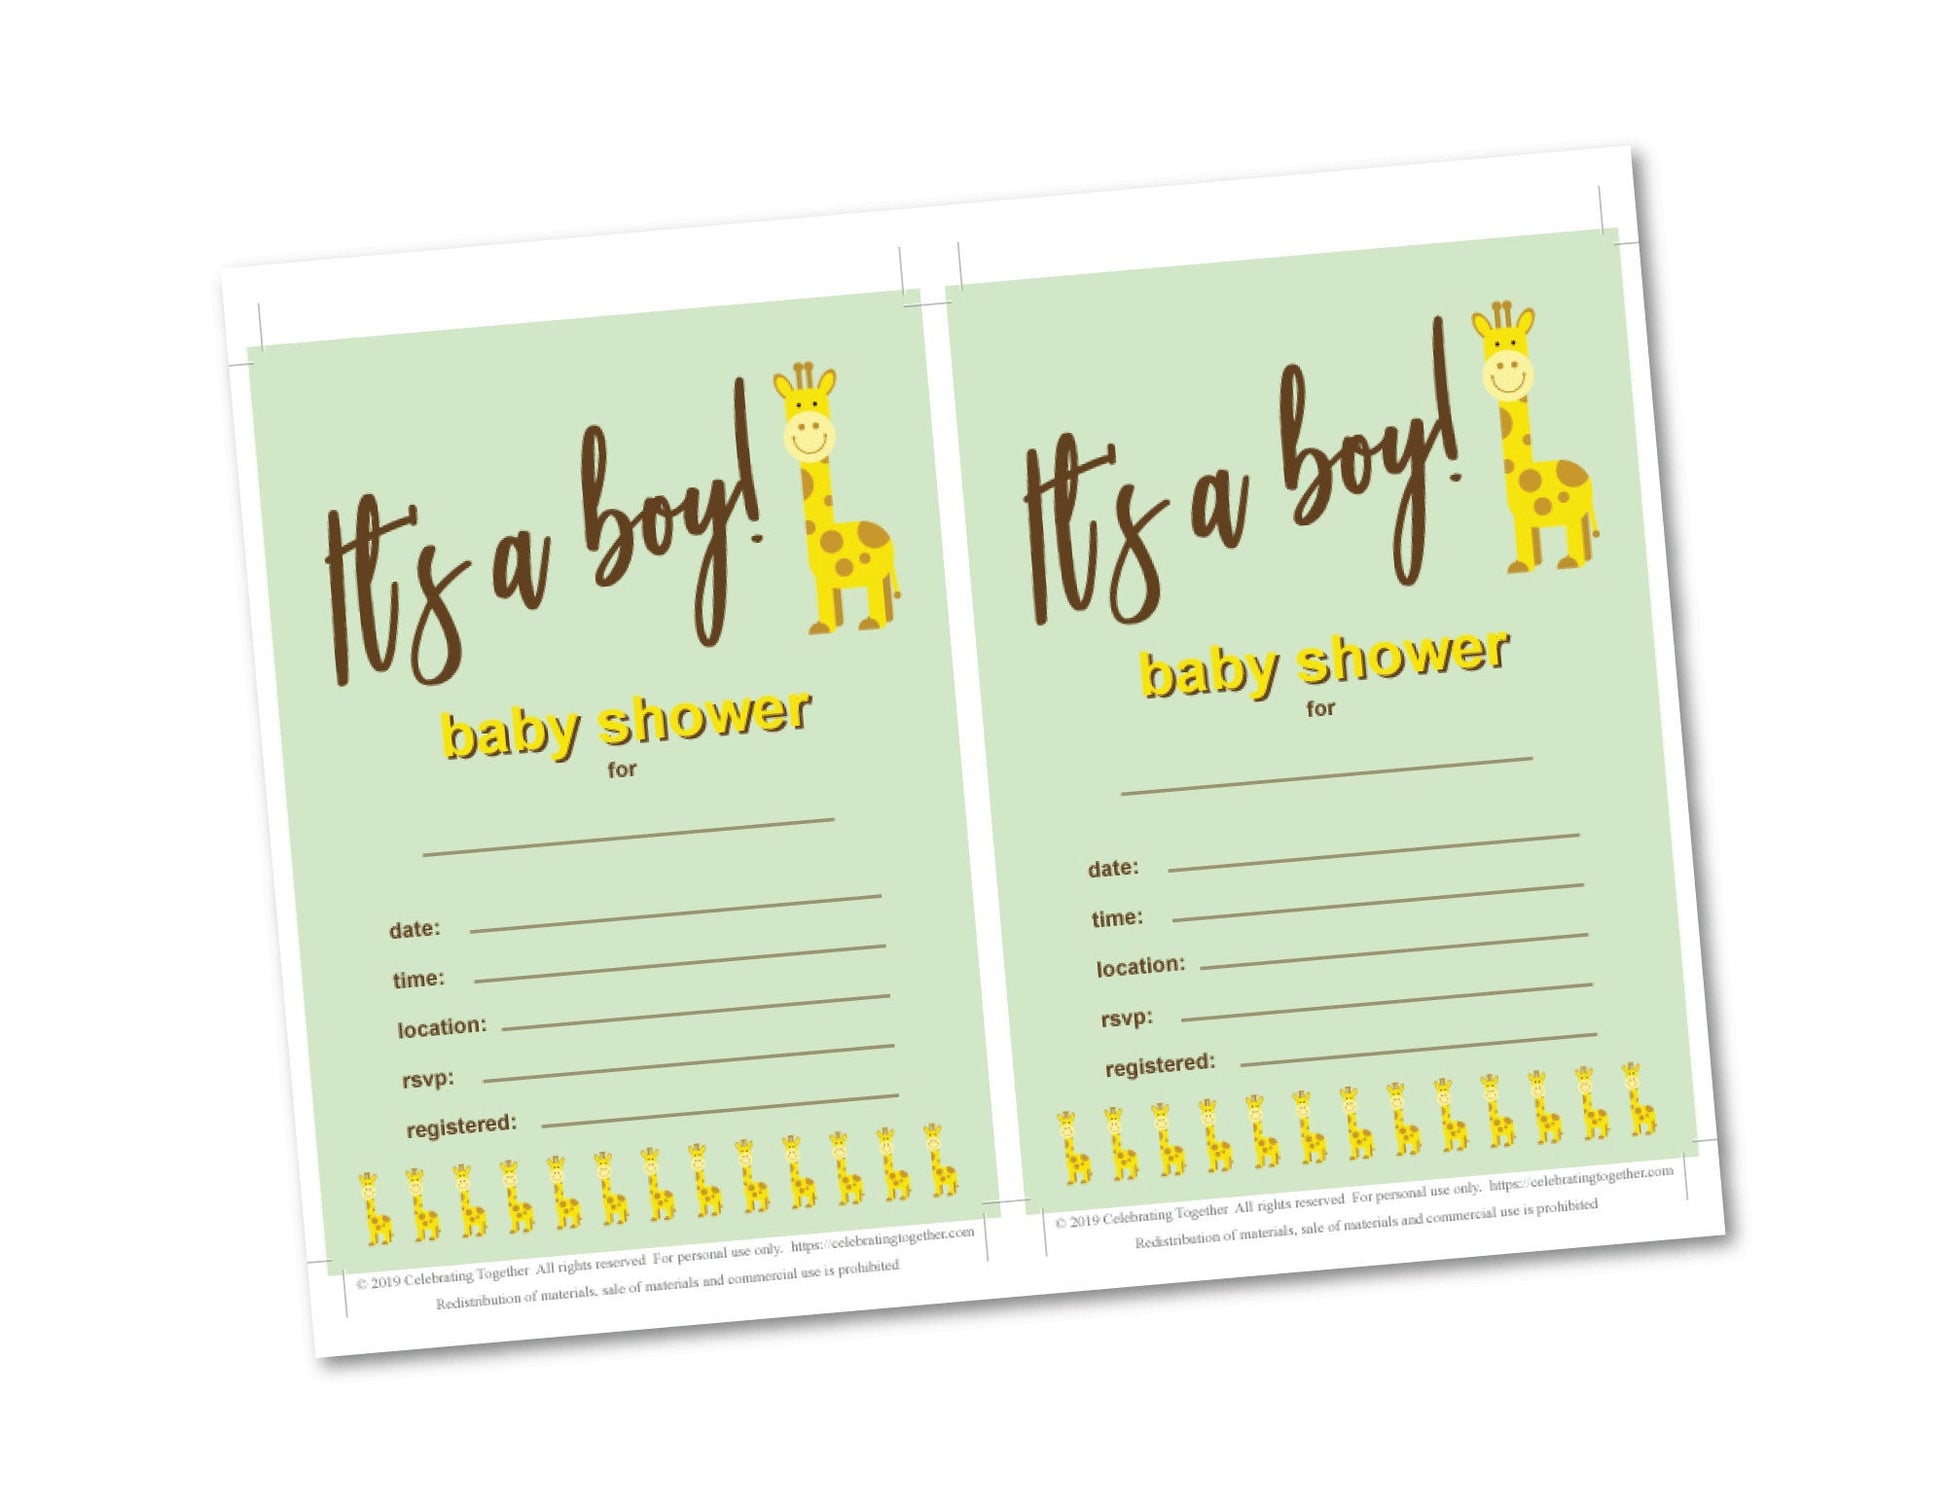 printable it's a boy baby shower invitations - Celebrating Together